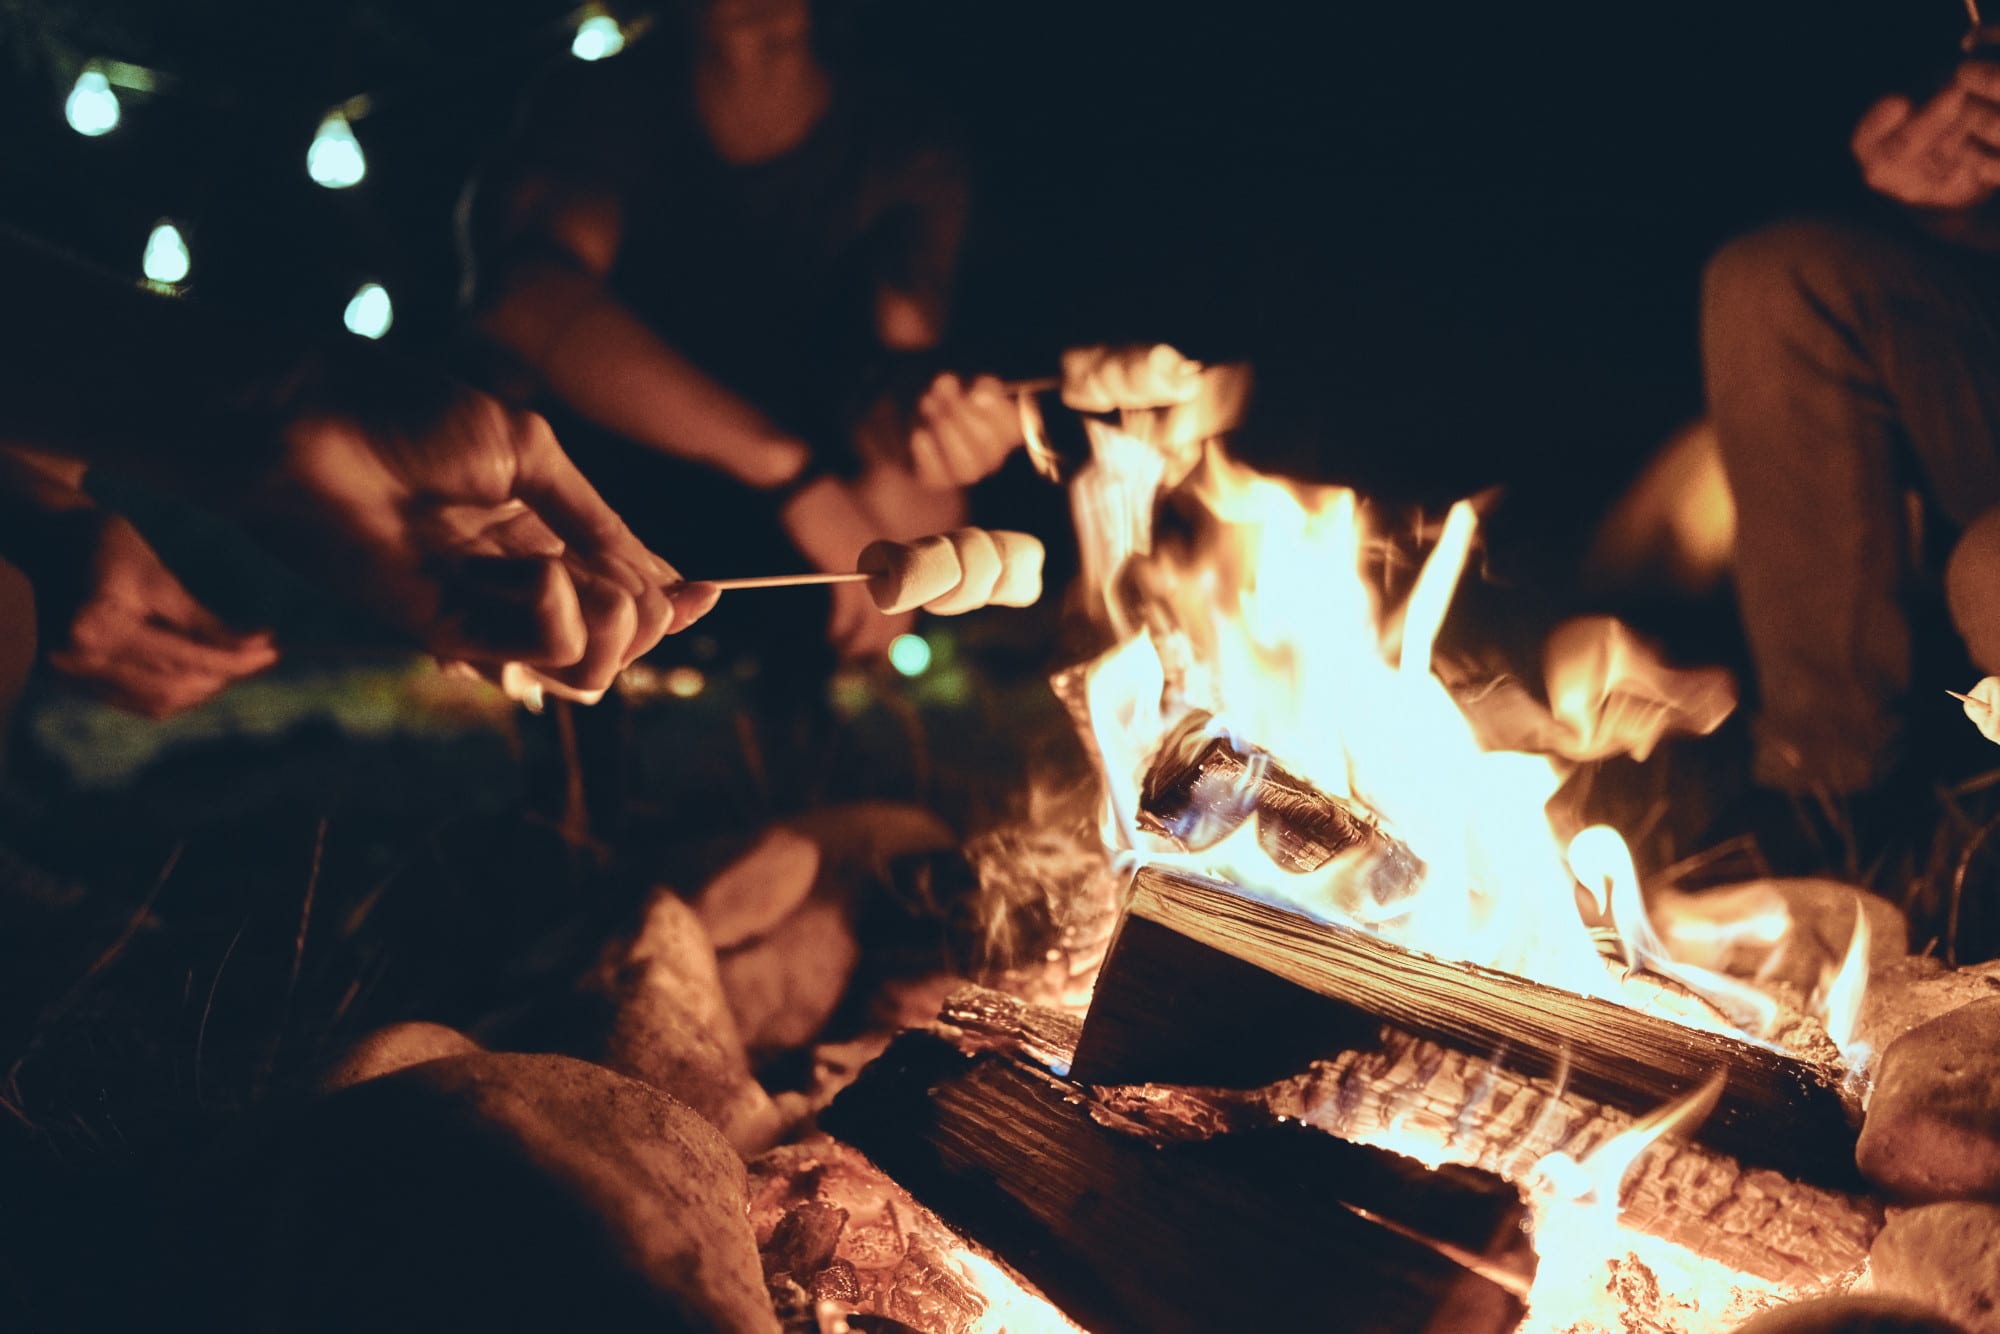 Toasting marshmallows over a campfire